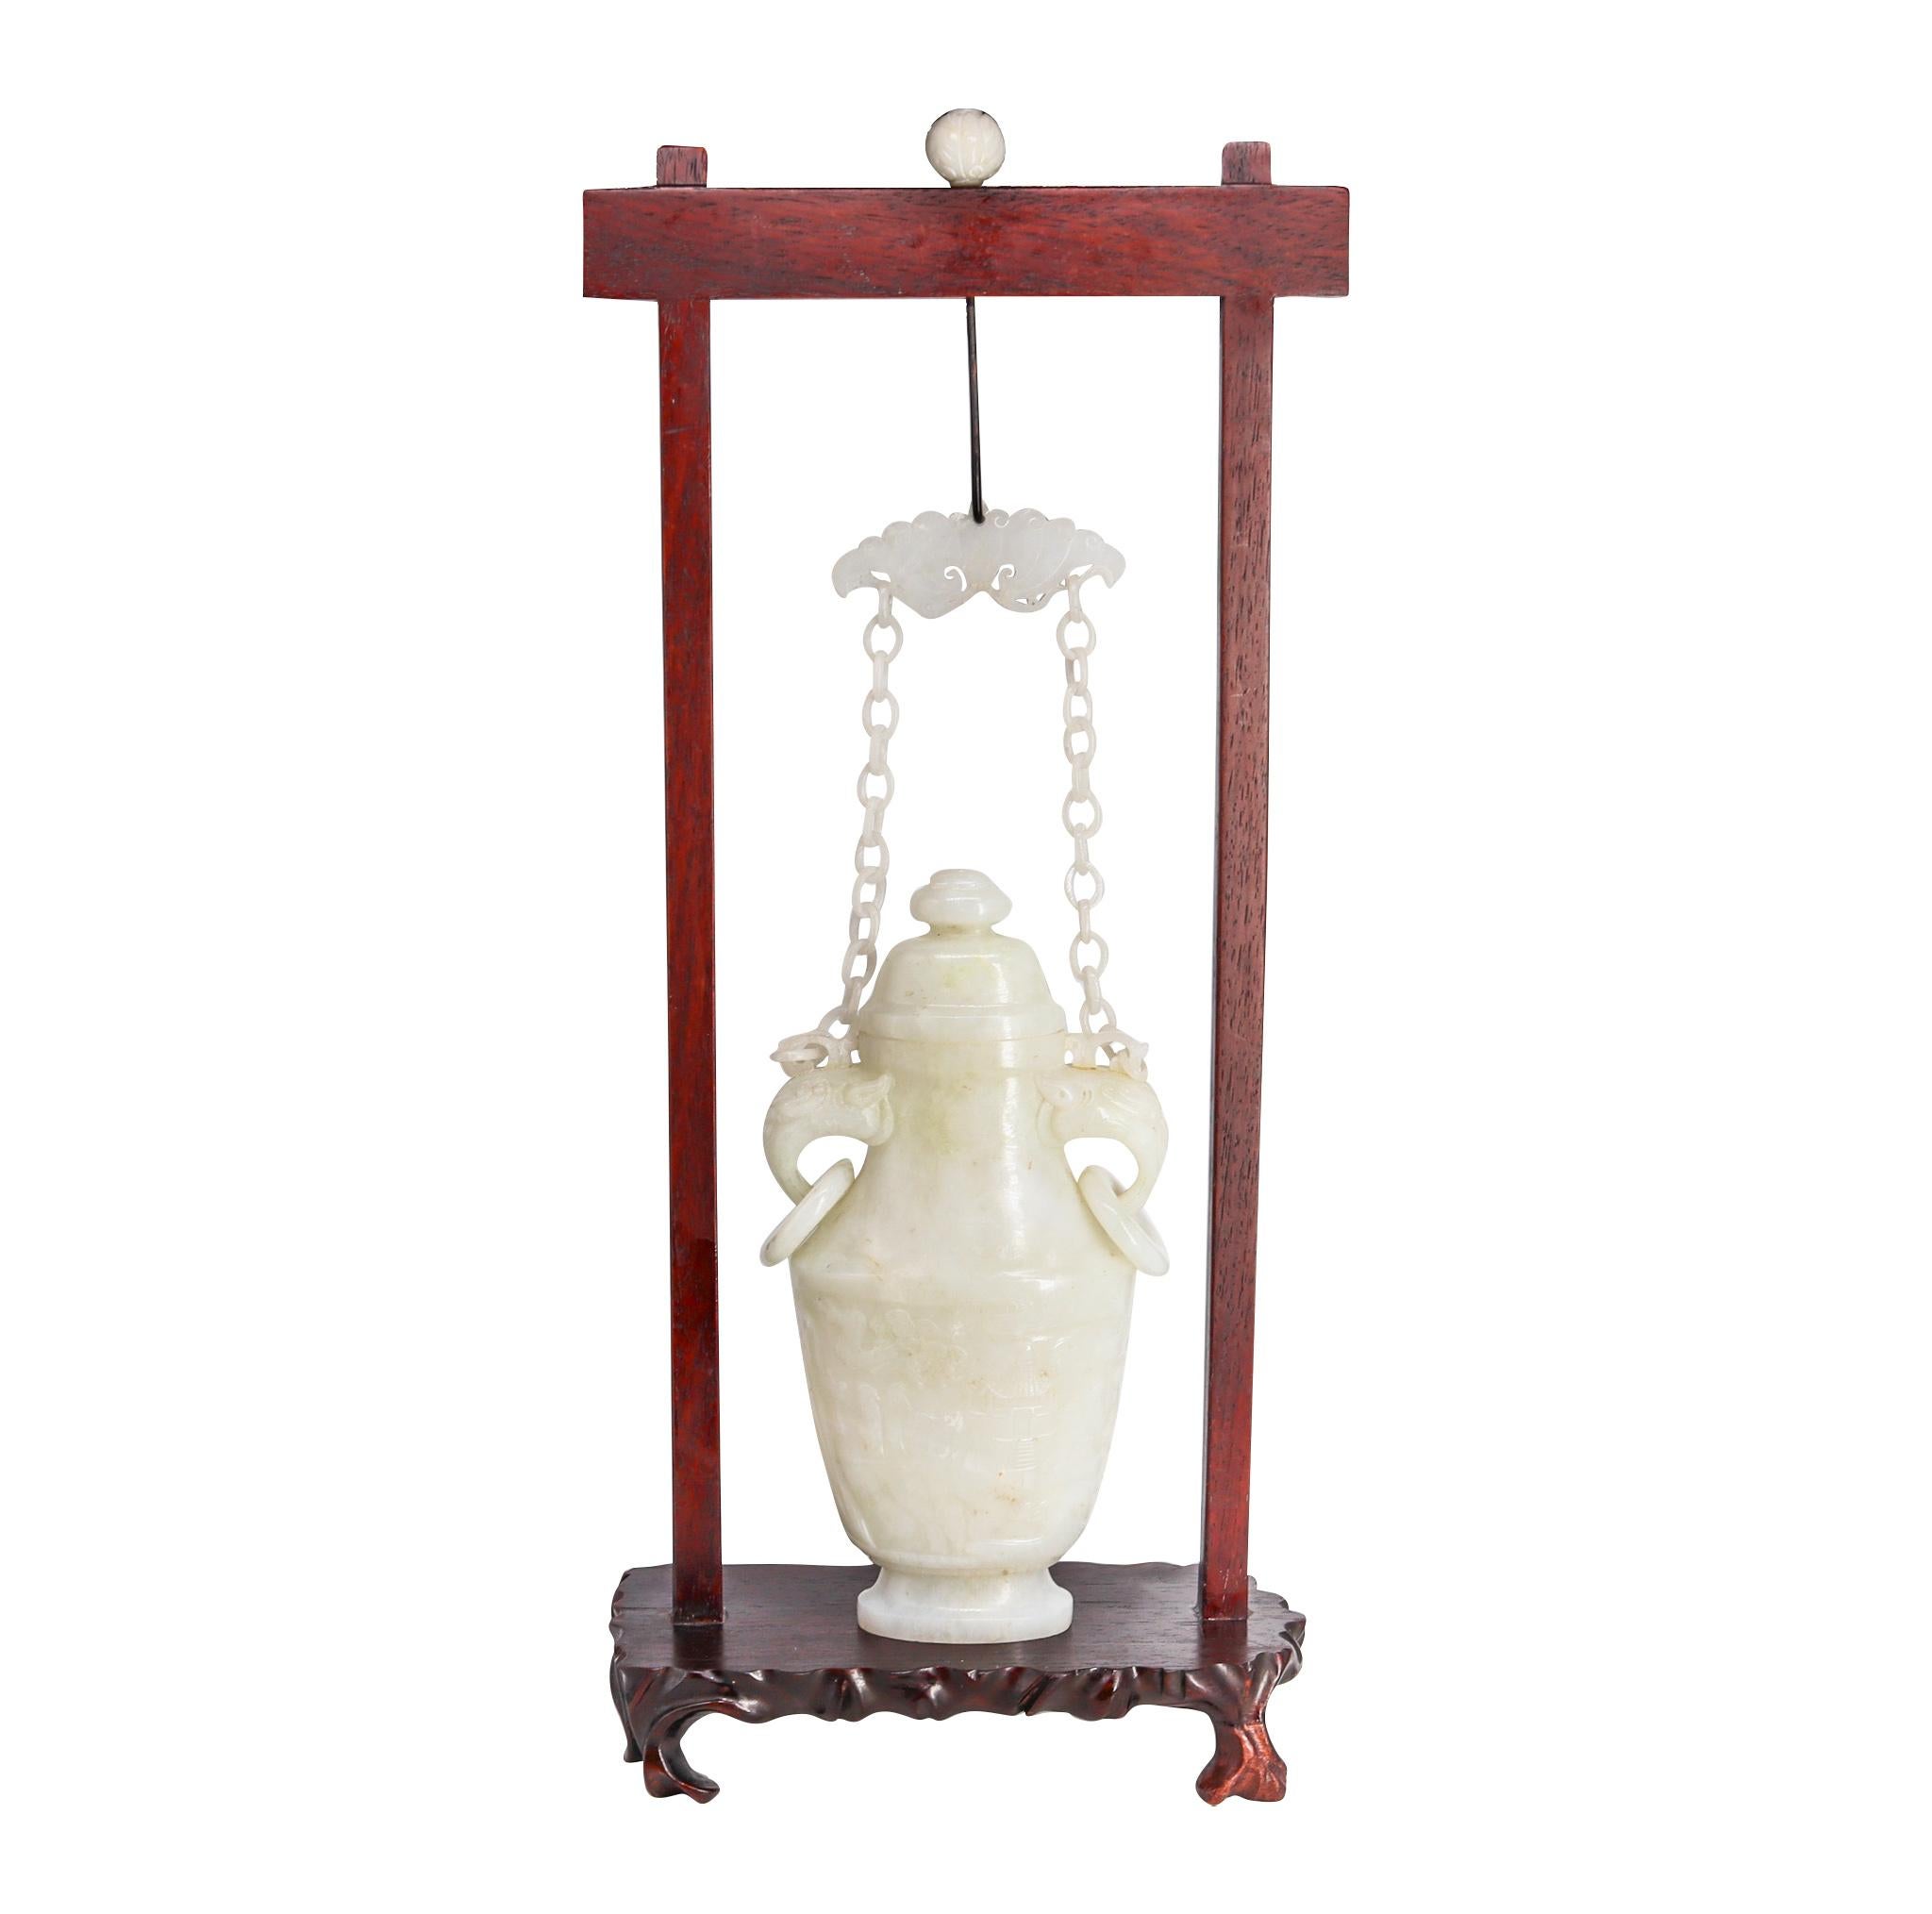 China Qing Dynasty 1890 Amphora Jar with Chains in White Jadeite Jade with Wood